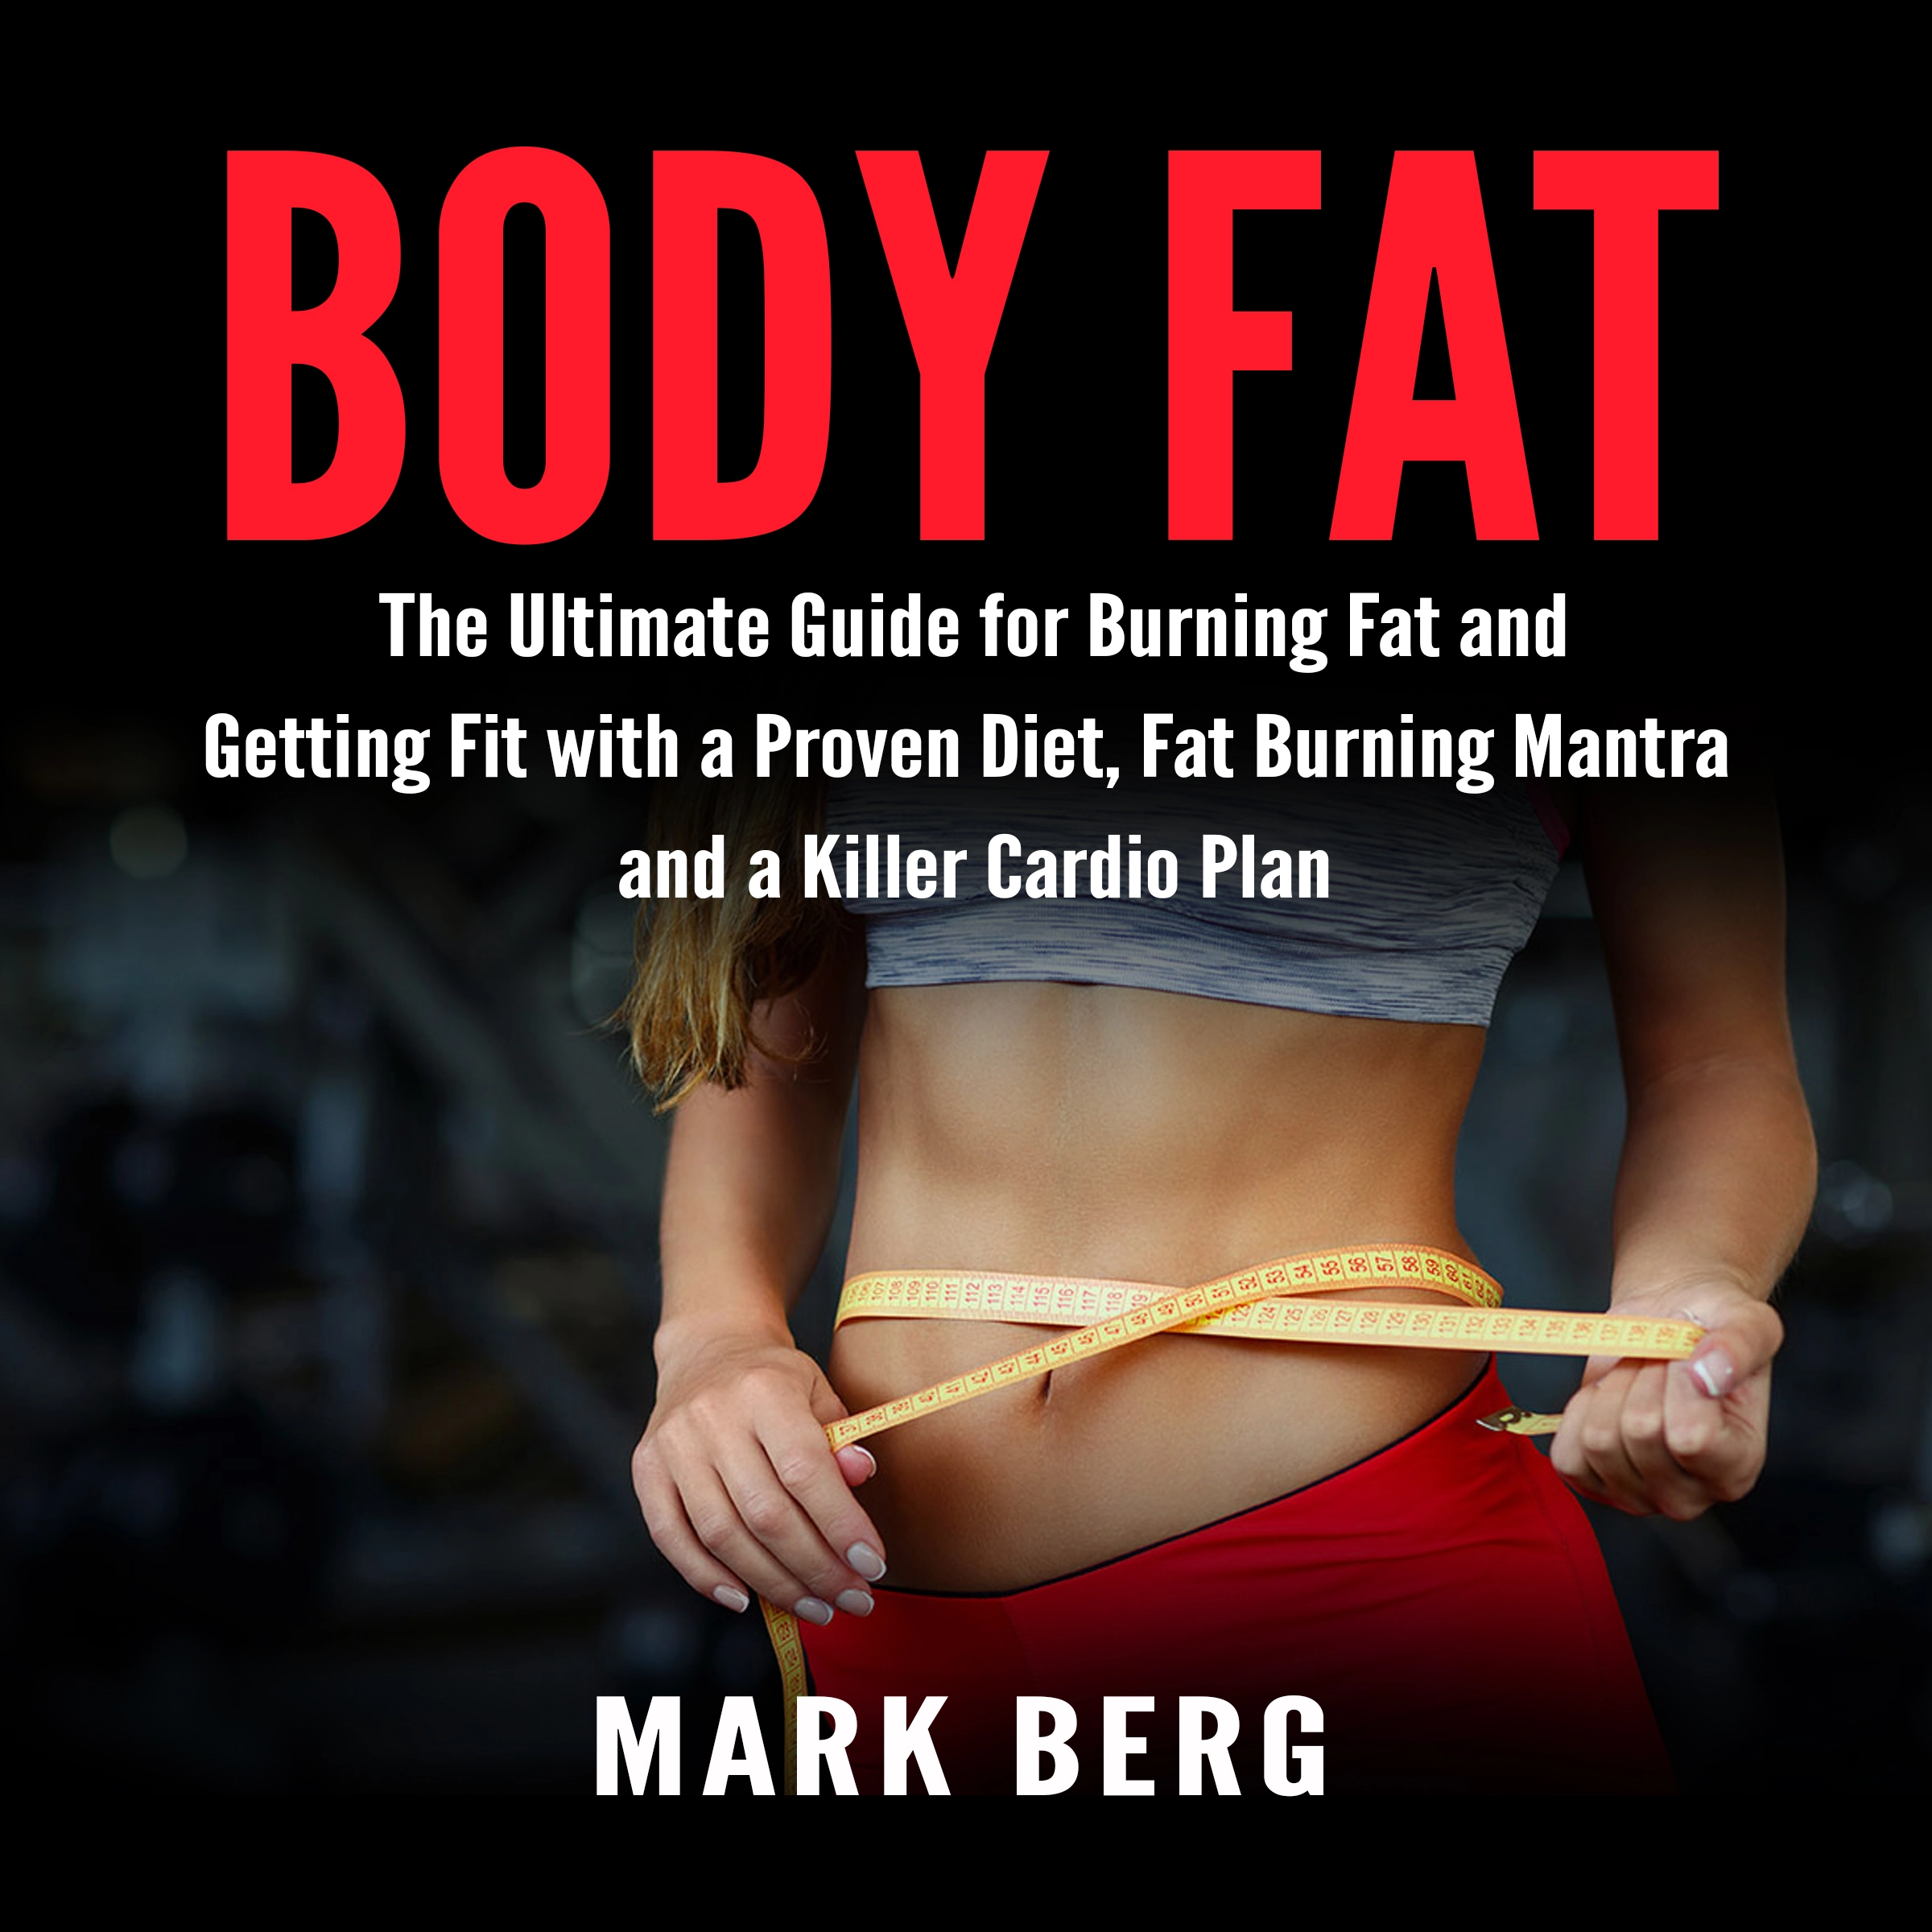 Body Fat: The Ultimate Guide for Burning Fat and Getting Fit with a Proven Diet, Fat Burning Mantra and a Killer Cardio Plan Audiobook by Mark Berg